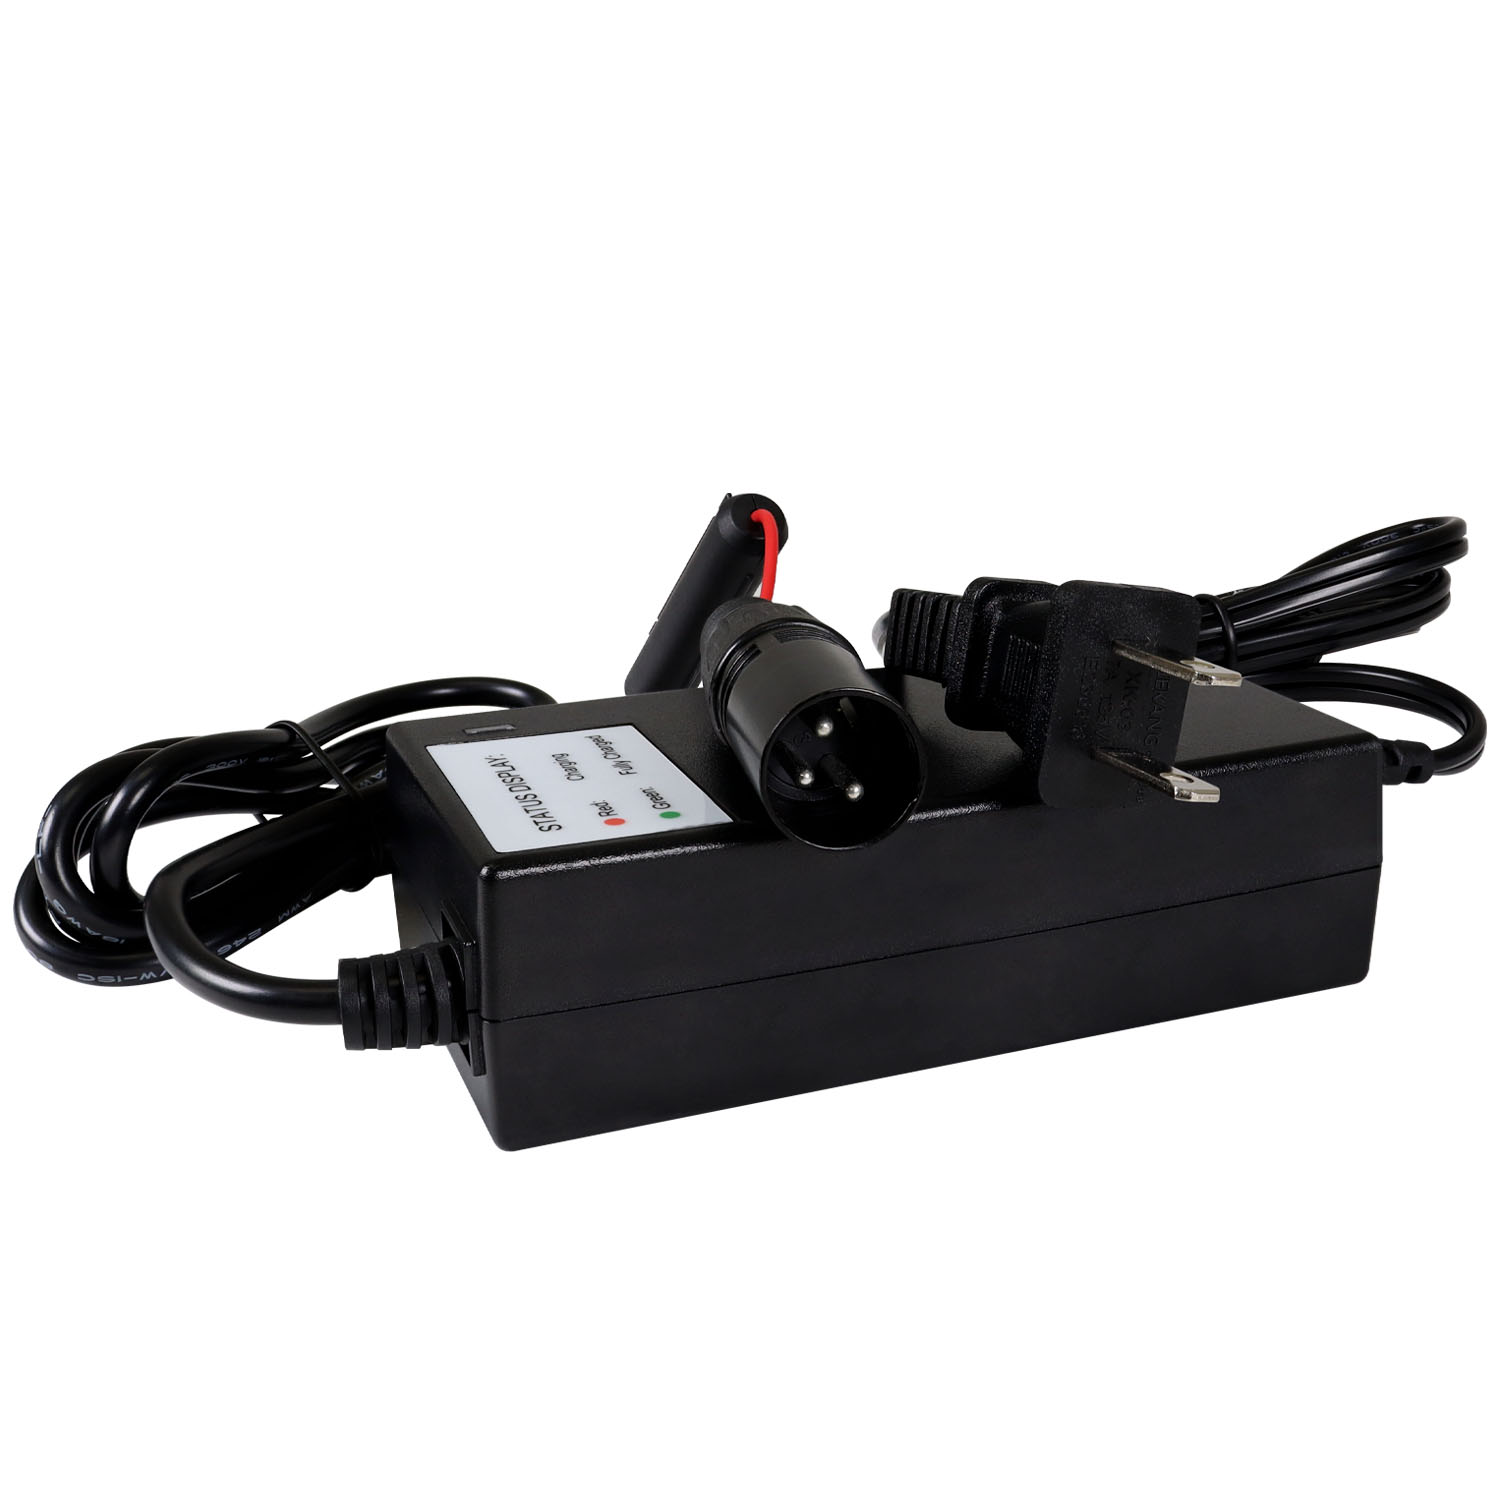 18 Volt 2 Amp SLA Battery Charger and Maintainer - MightyMaxBattery